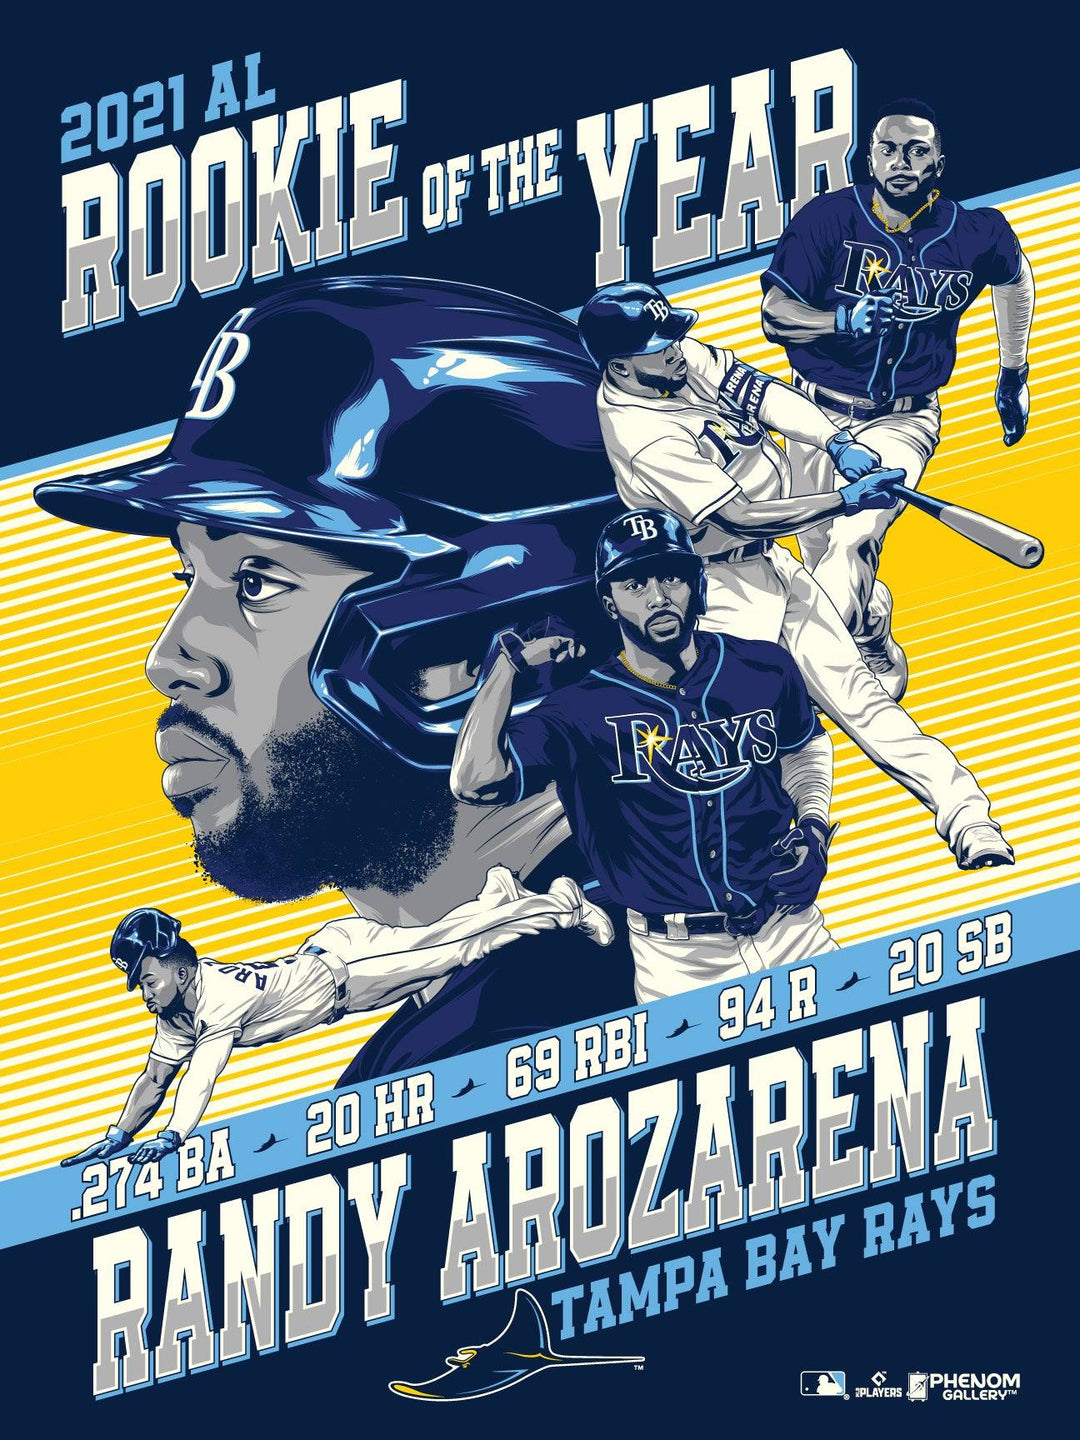 TAMPA BAY RAYS RANDY AROZARENA ROOKIE OF THE YEAR PHENOM PRINT - The Bay Republic | Team Store of the Tampa Bay Rays & Rowdies